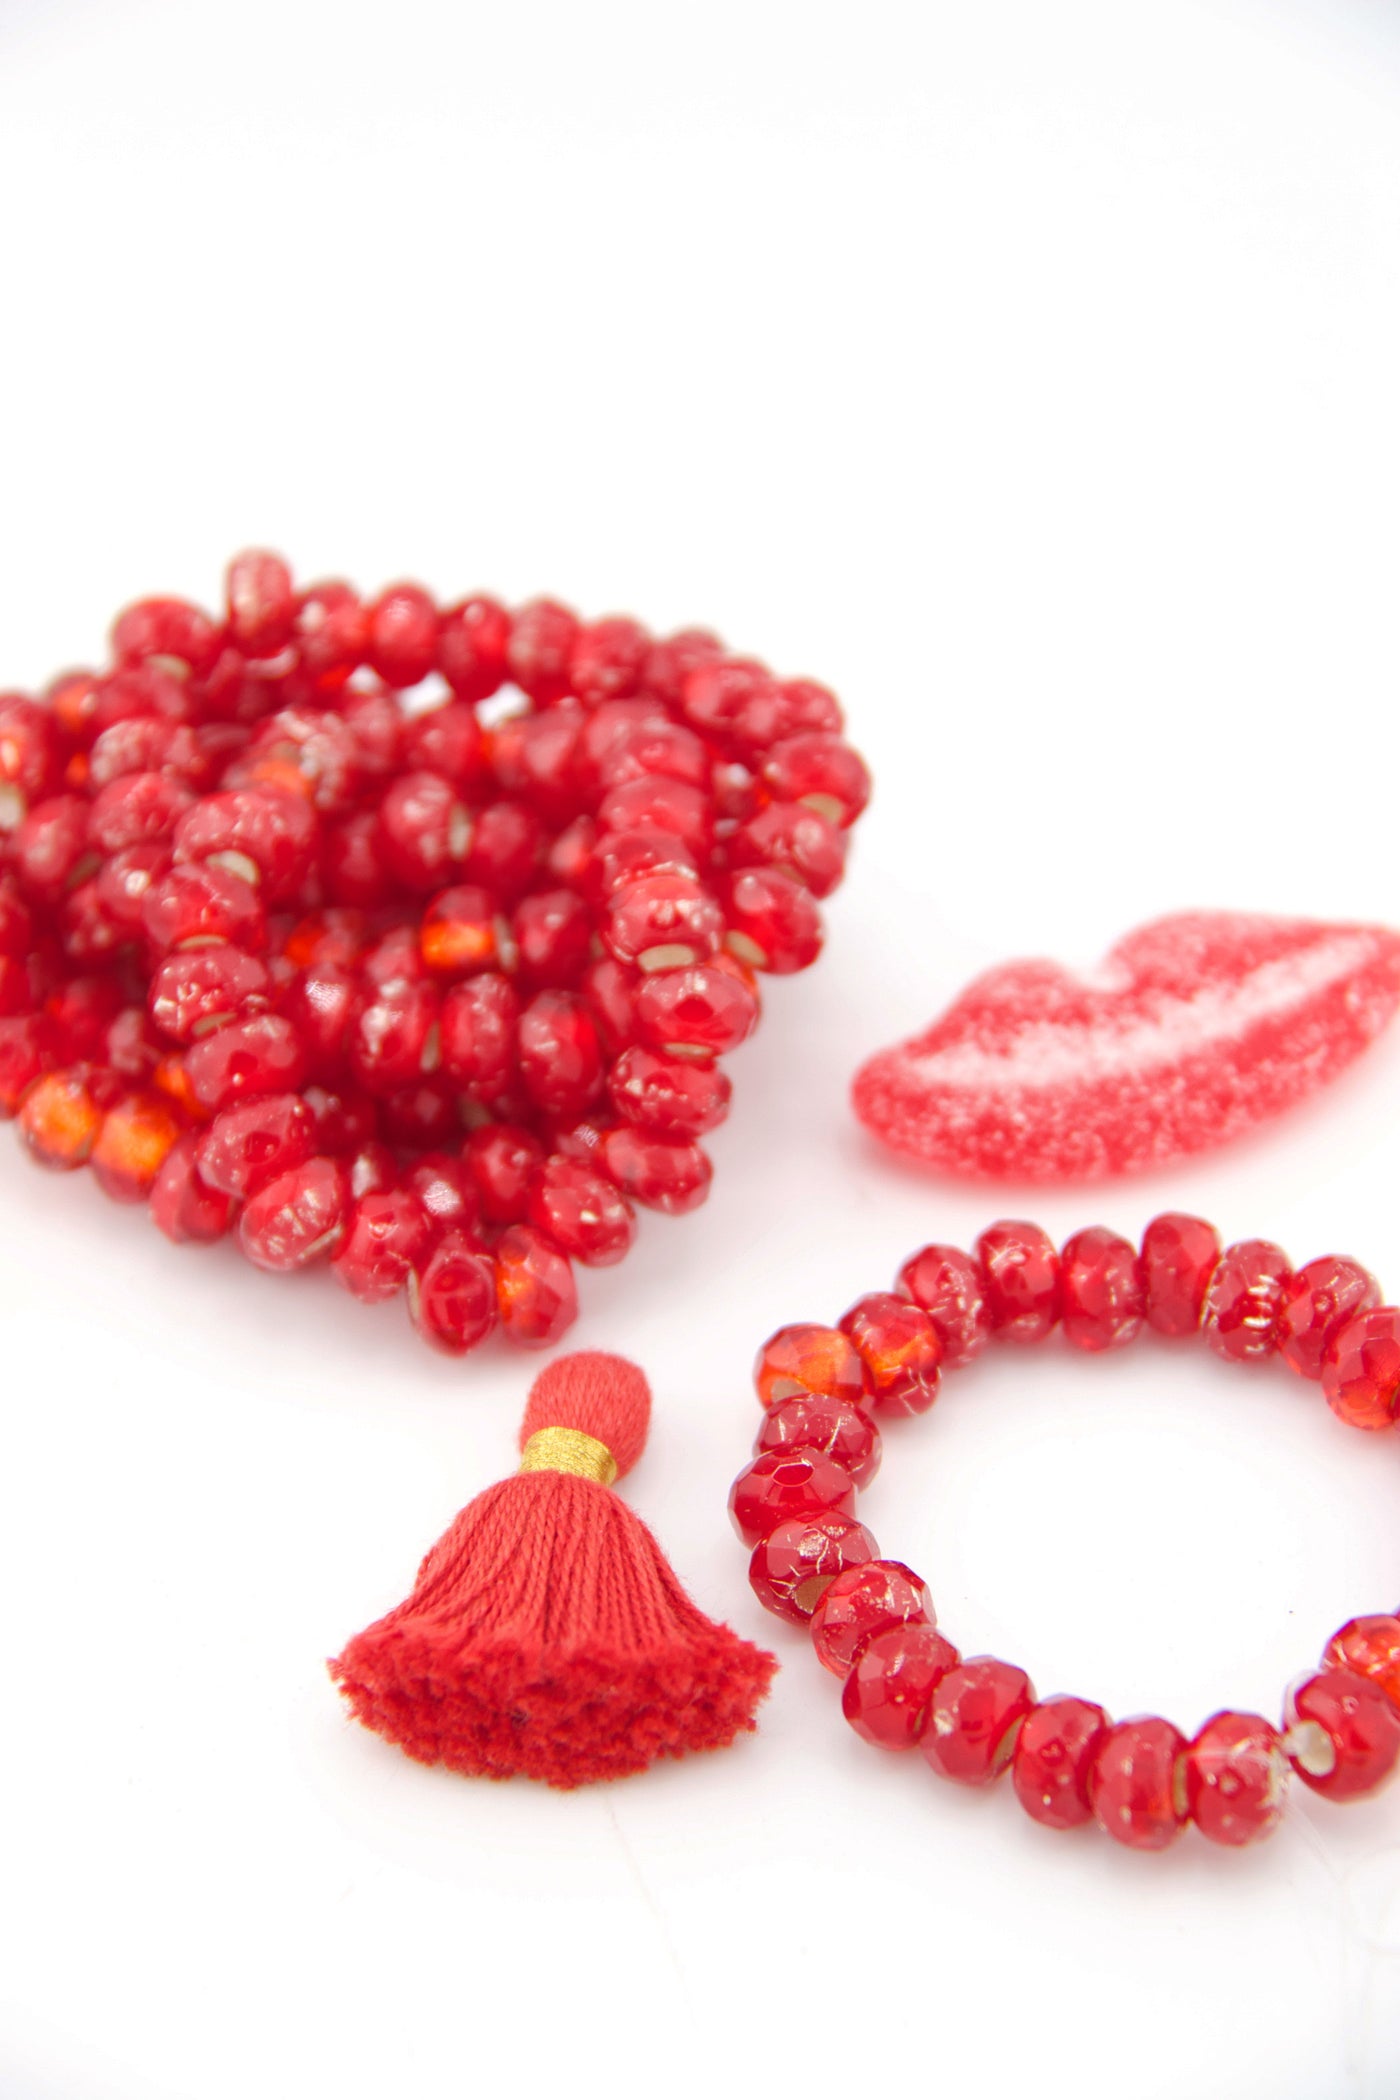 Red Czech Glass with Silver Lining, 9x6mm, 25 Large Hole Faceted Beads for Valentine's Day Jewelry